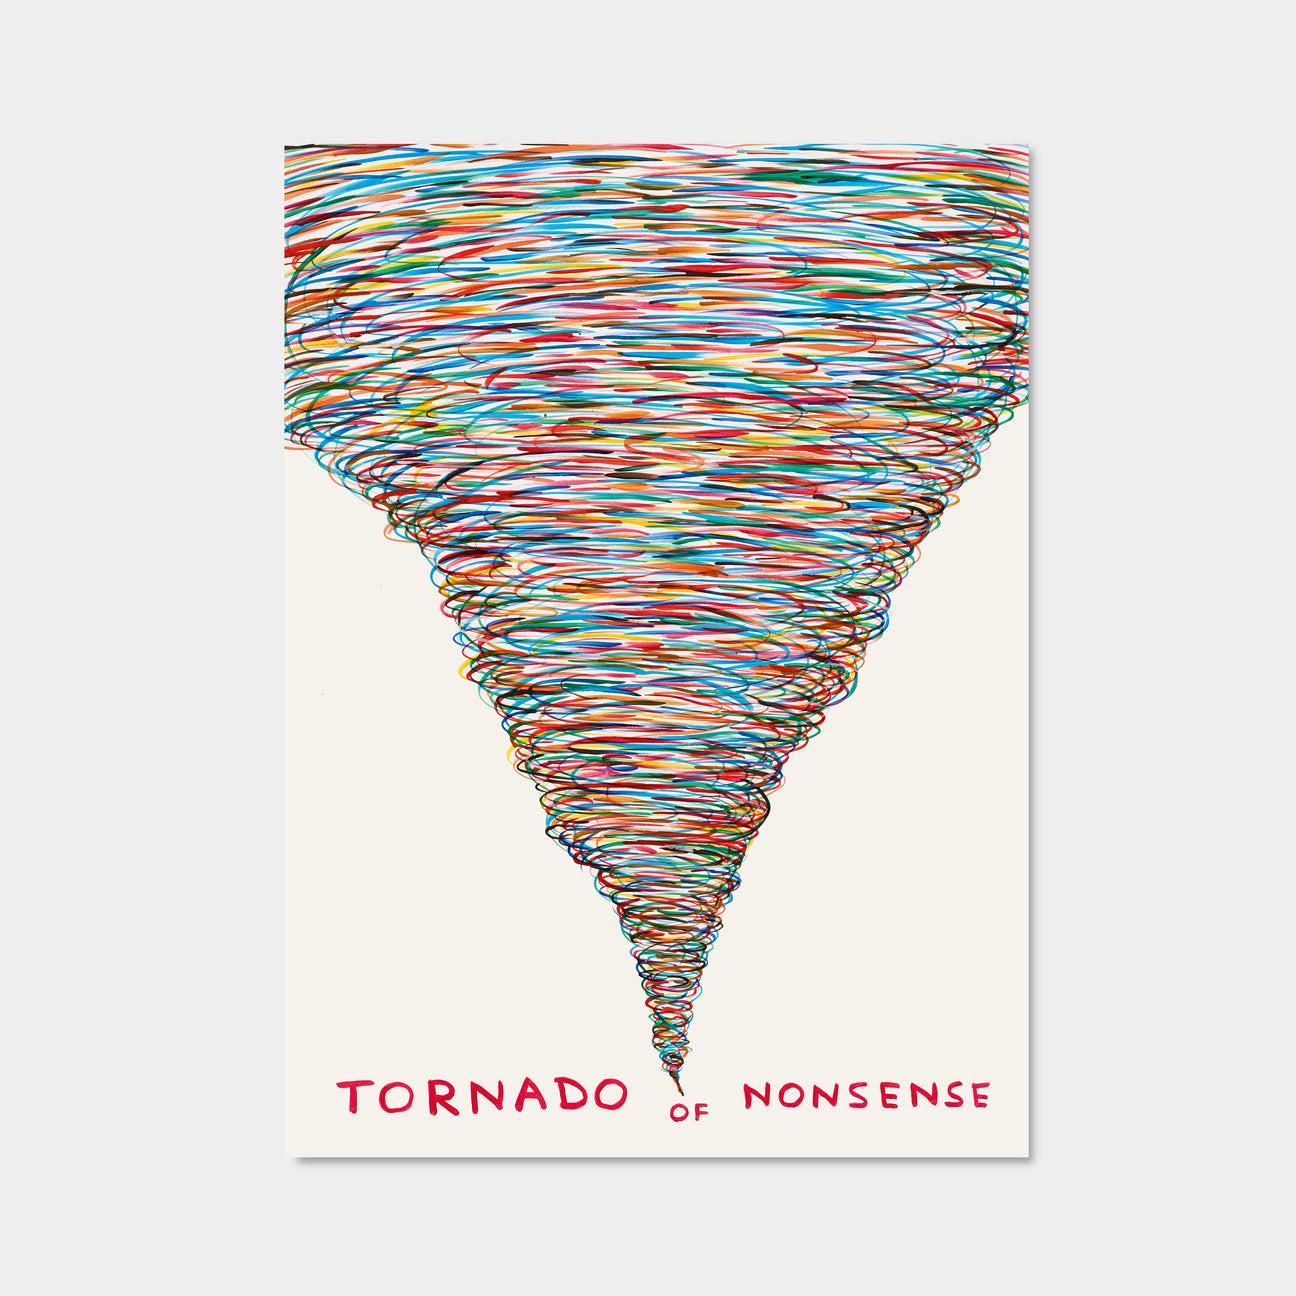 David Shrigley, Tornado Of Nonsense & It Was Worthwhile Doing This

60 x 80 cm (31 1/2 × 23 3/5 in)

Off-set lithography

Printed on 200g Munken Lynx paper

Narayana Press in Denmark